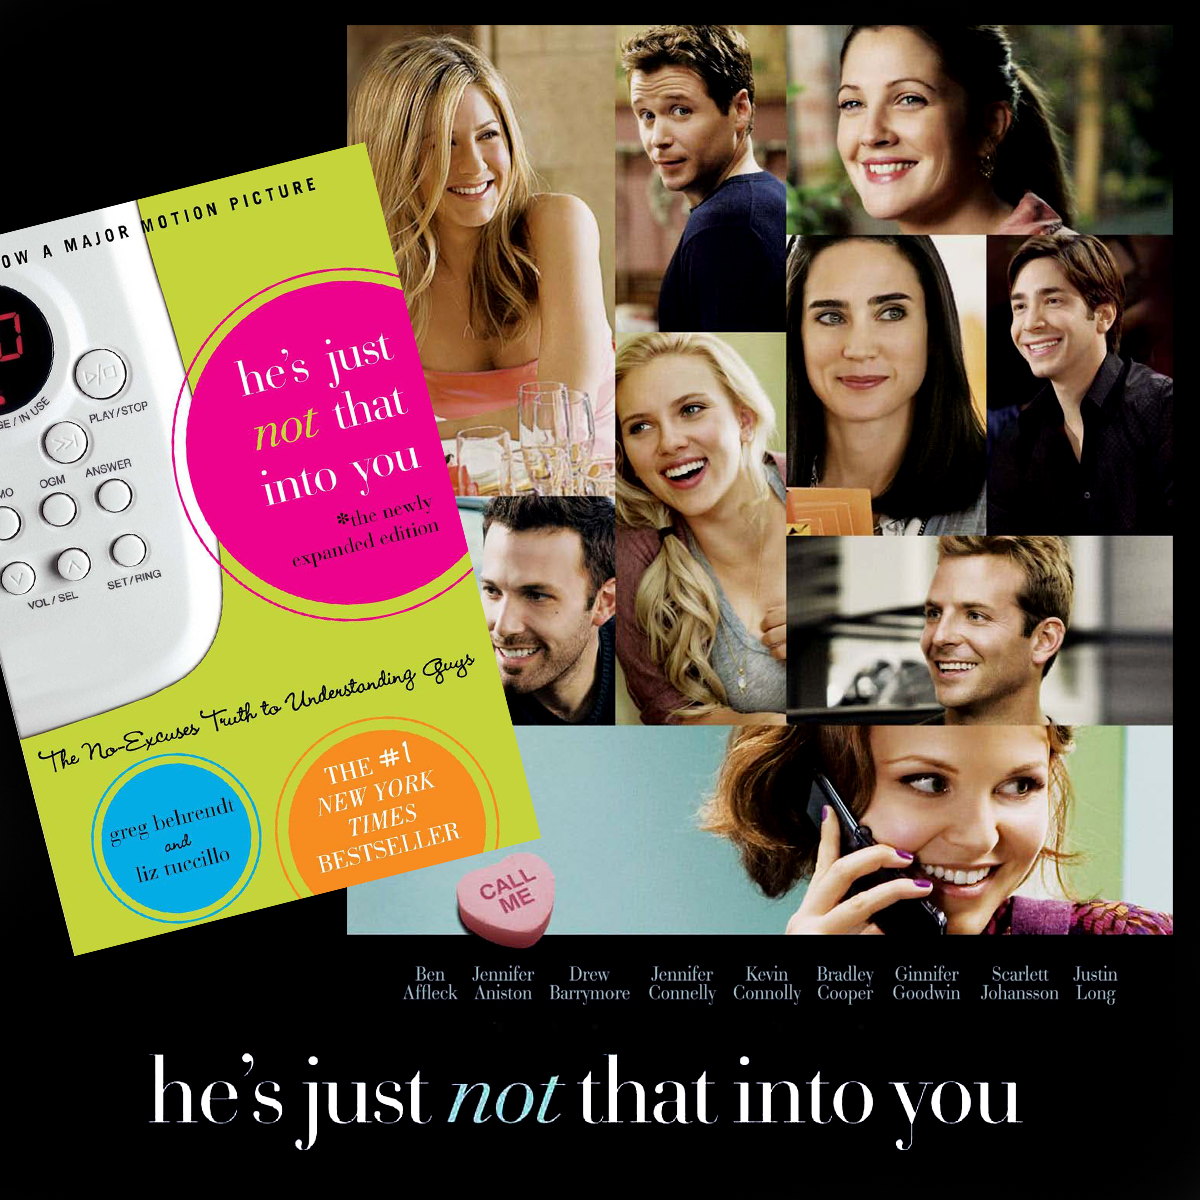 Review Buku Film Hes Just Not That Into You No Bullst Rules To Deal With Guys The Stupid Bookworm